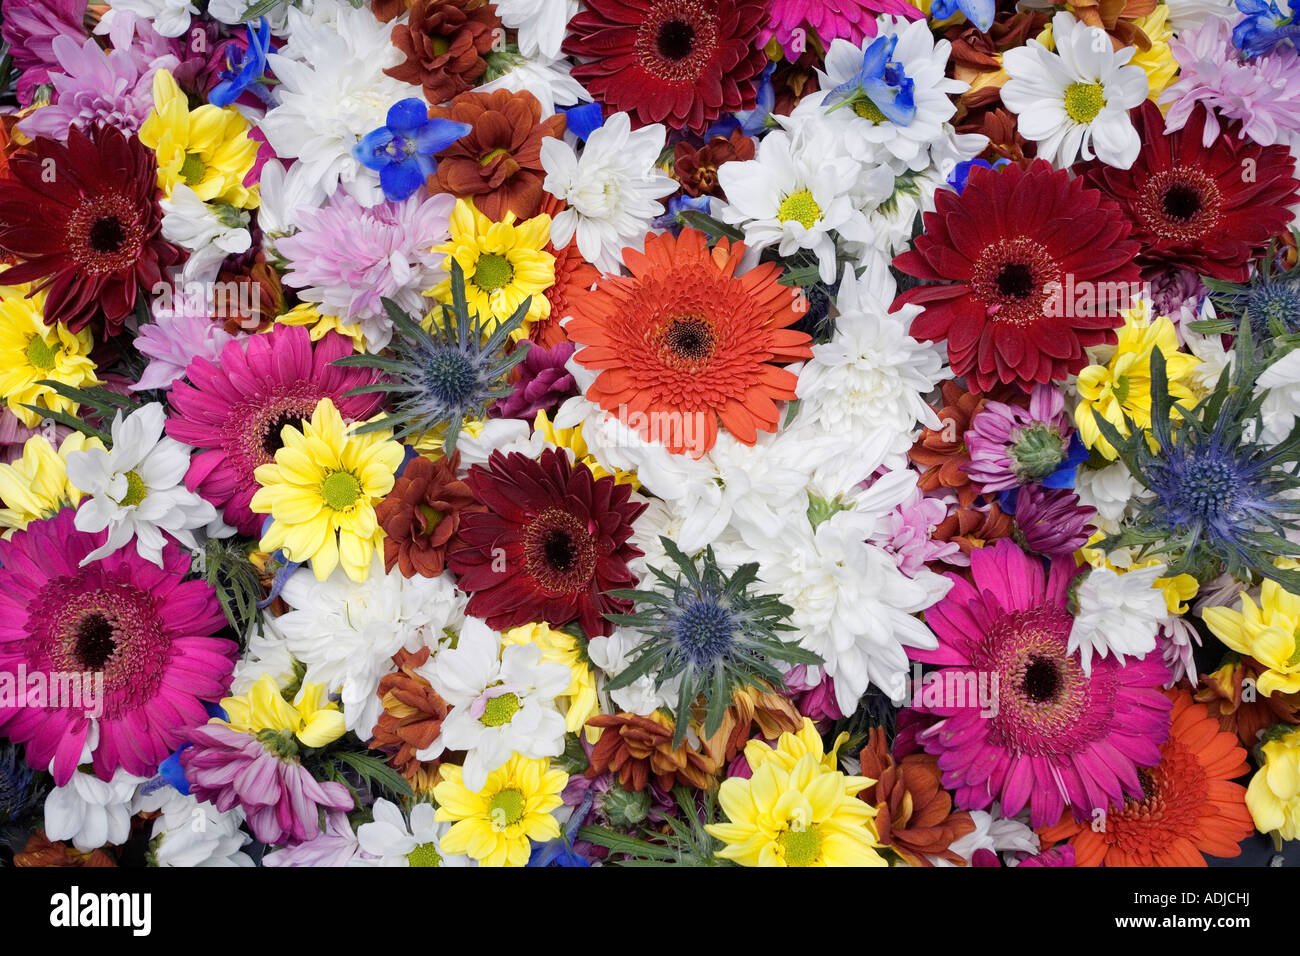 Colourful Cut flower heads pattern Stock Photo